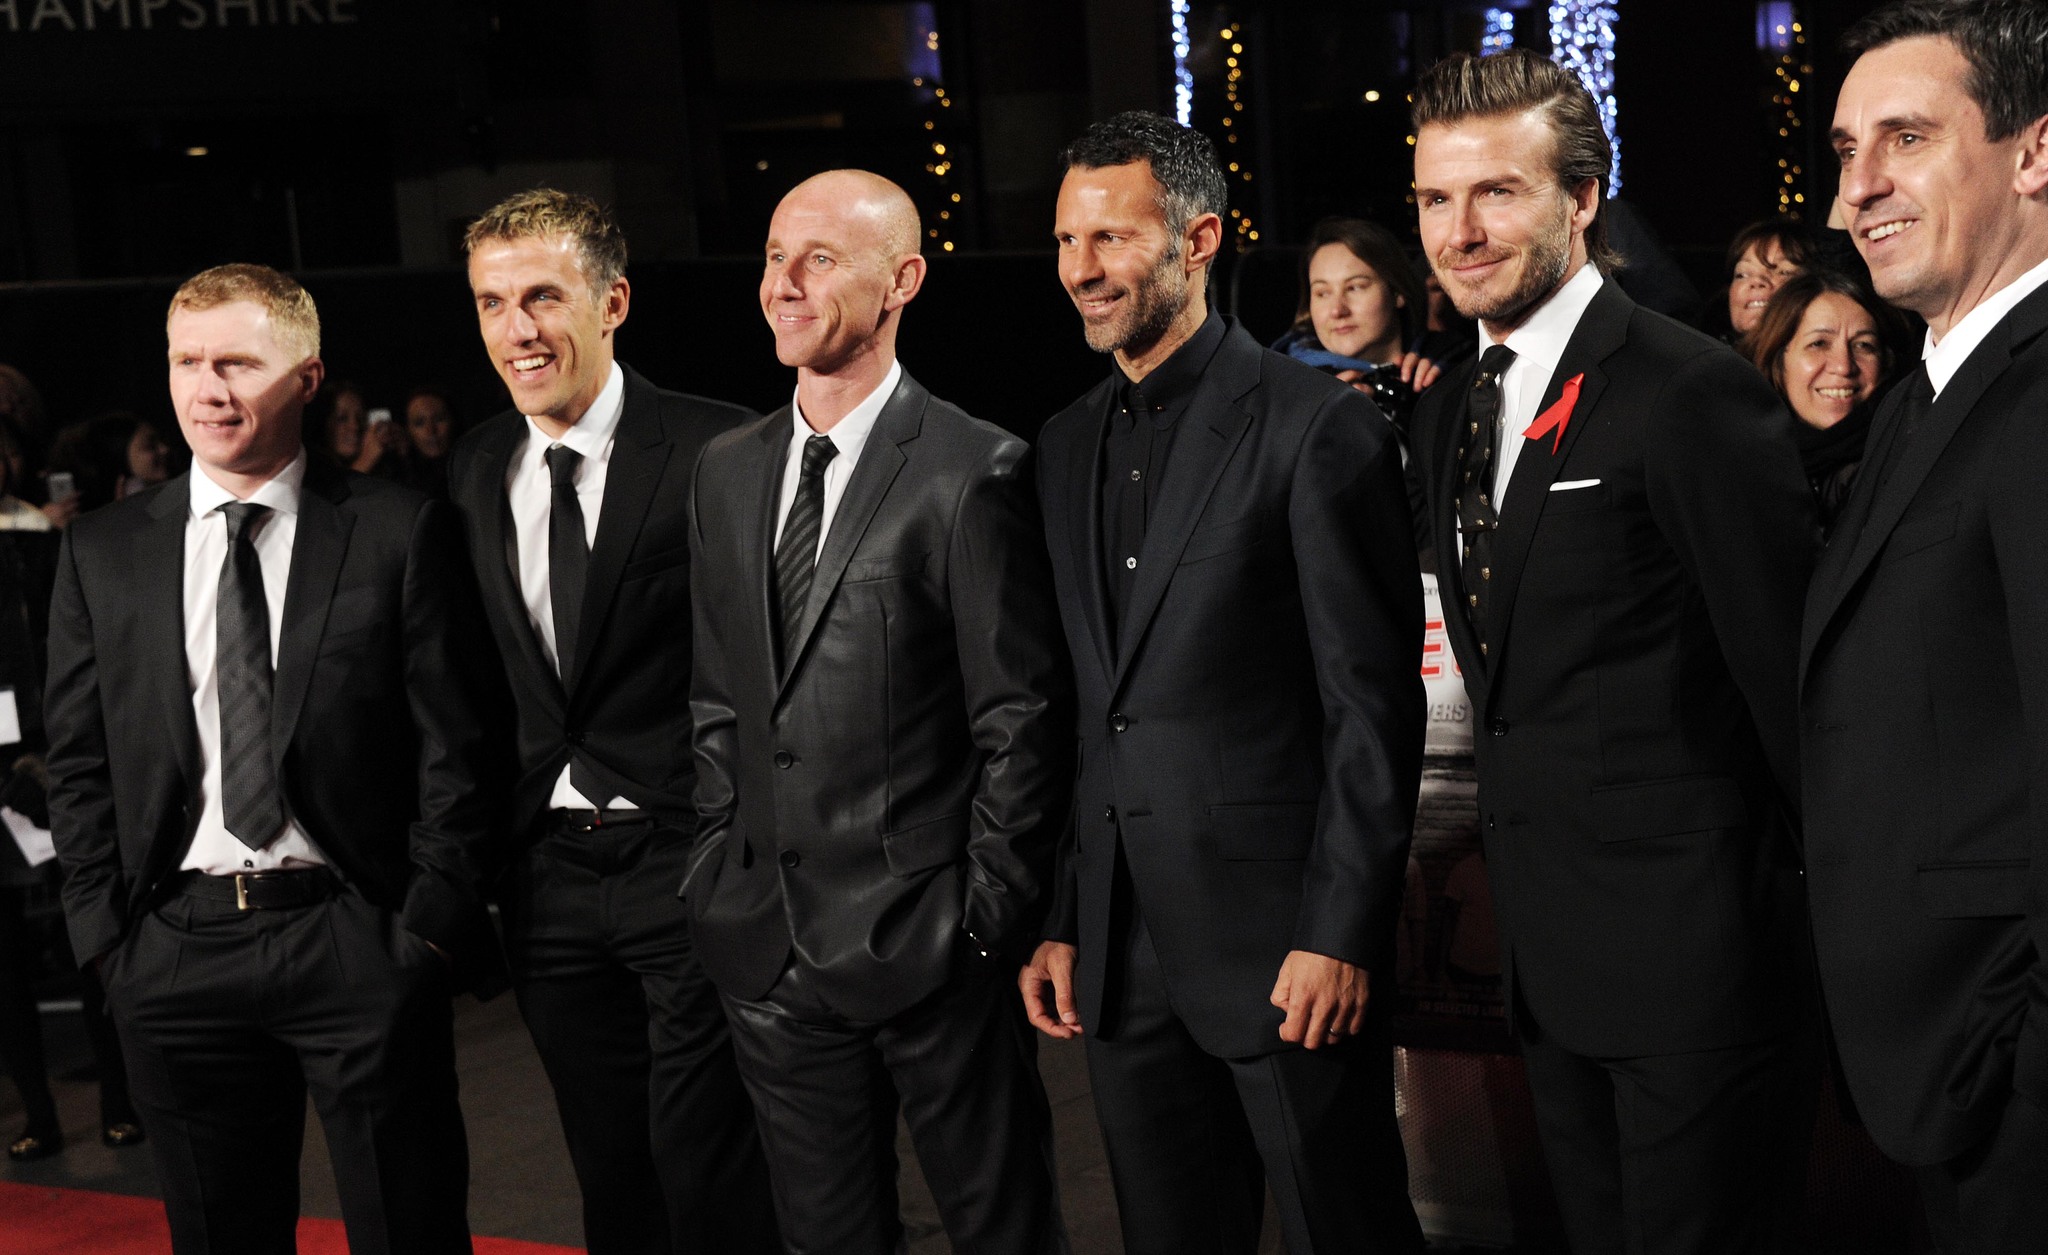 David Beckham, Ryan Giggs, Gary Neville, Phil Neville, Nicky Butt and Paul Scholes at event of The Class of 92 (2013)